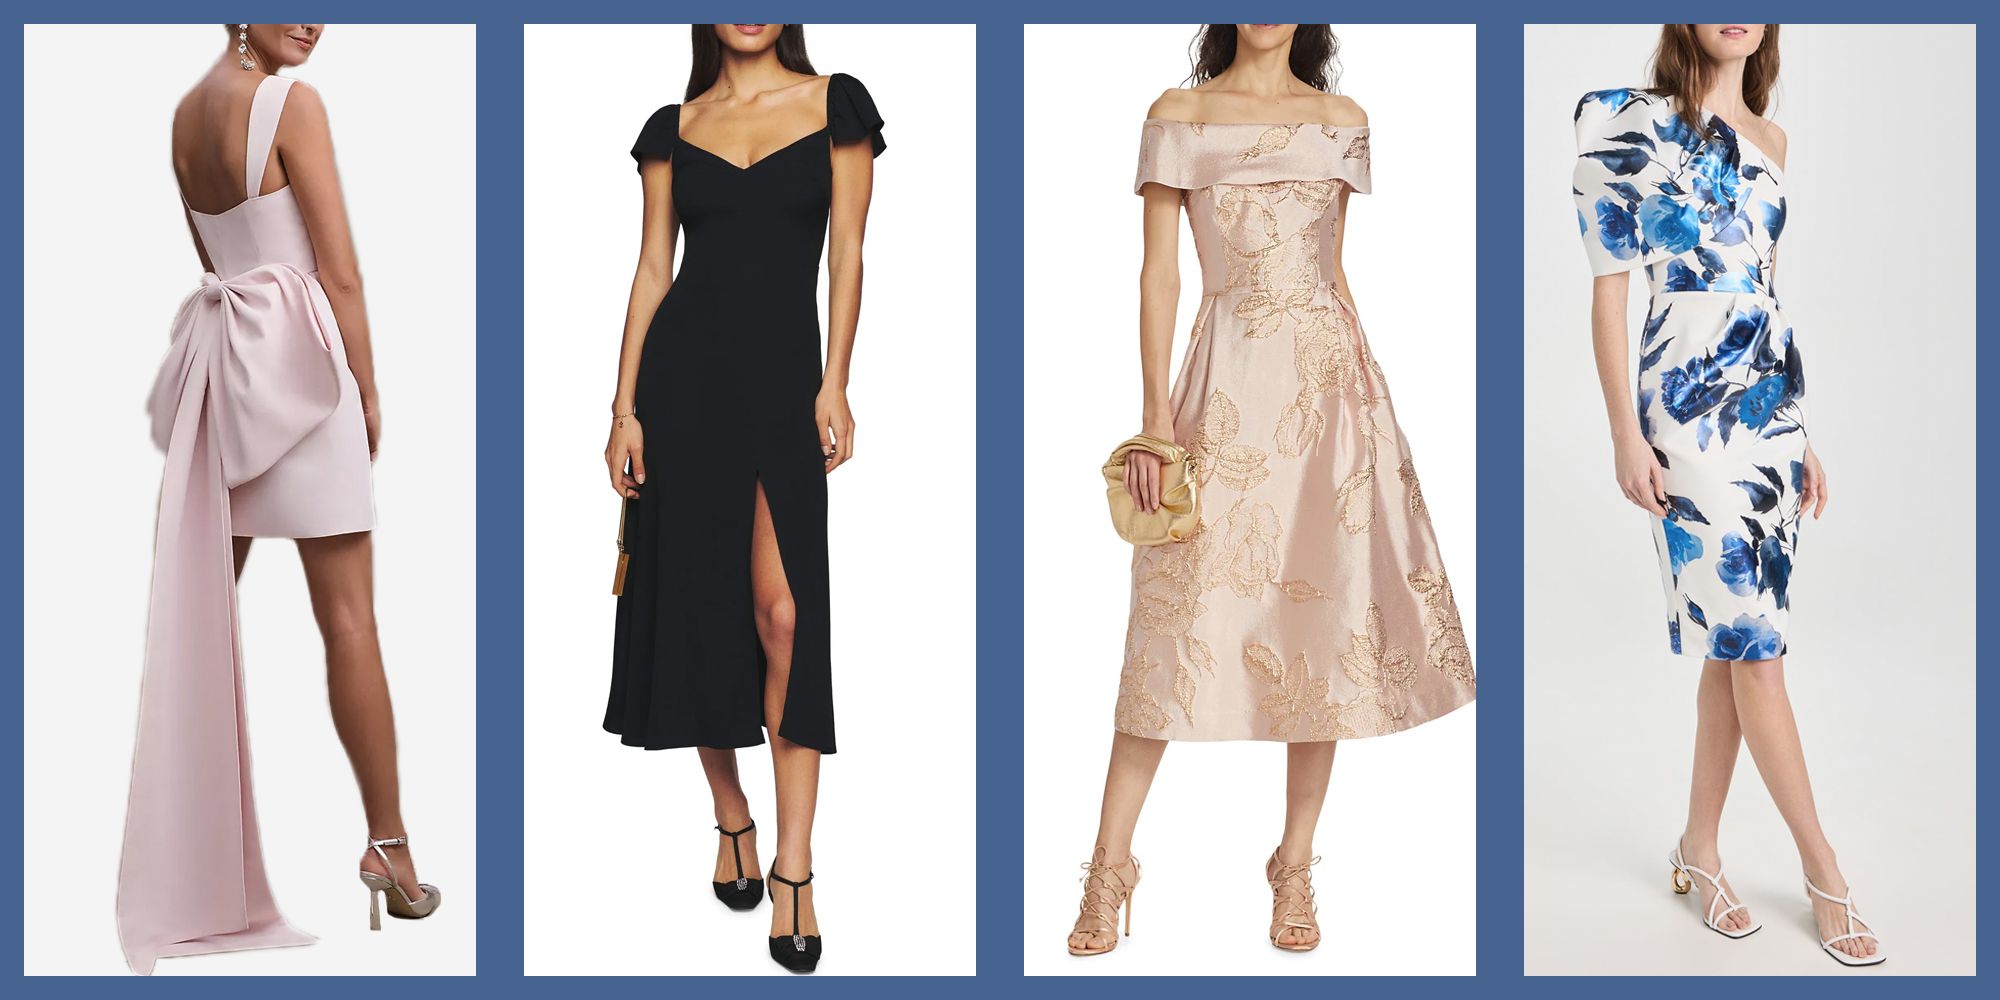 The Most Stylish Wedding Guest Dresses For Spring | Wedding guest dresses  long, Formal wedding guest dress, Wedding guest gowns